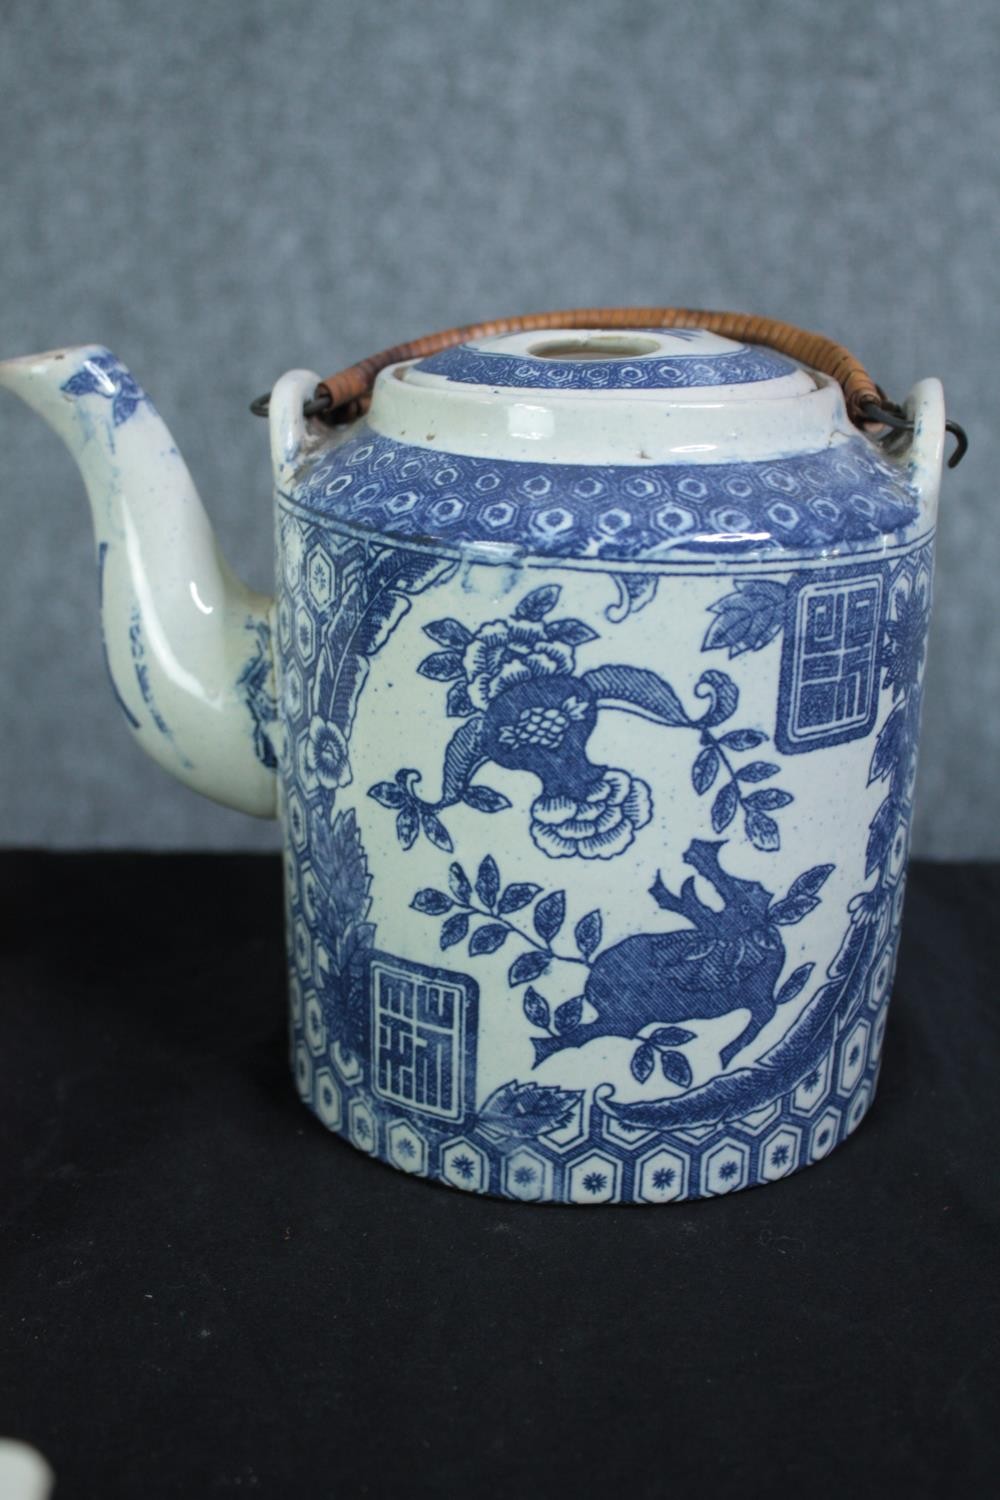 A mixed collection of blue and white Chinese porcelain including a teapot and vases. Signed on the - Image 6 of 12